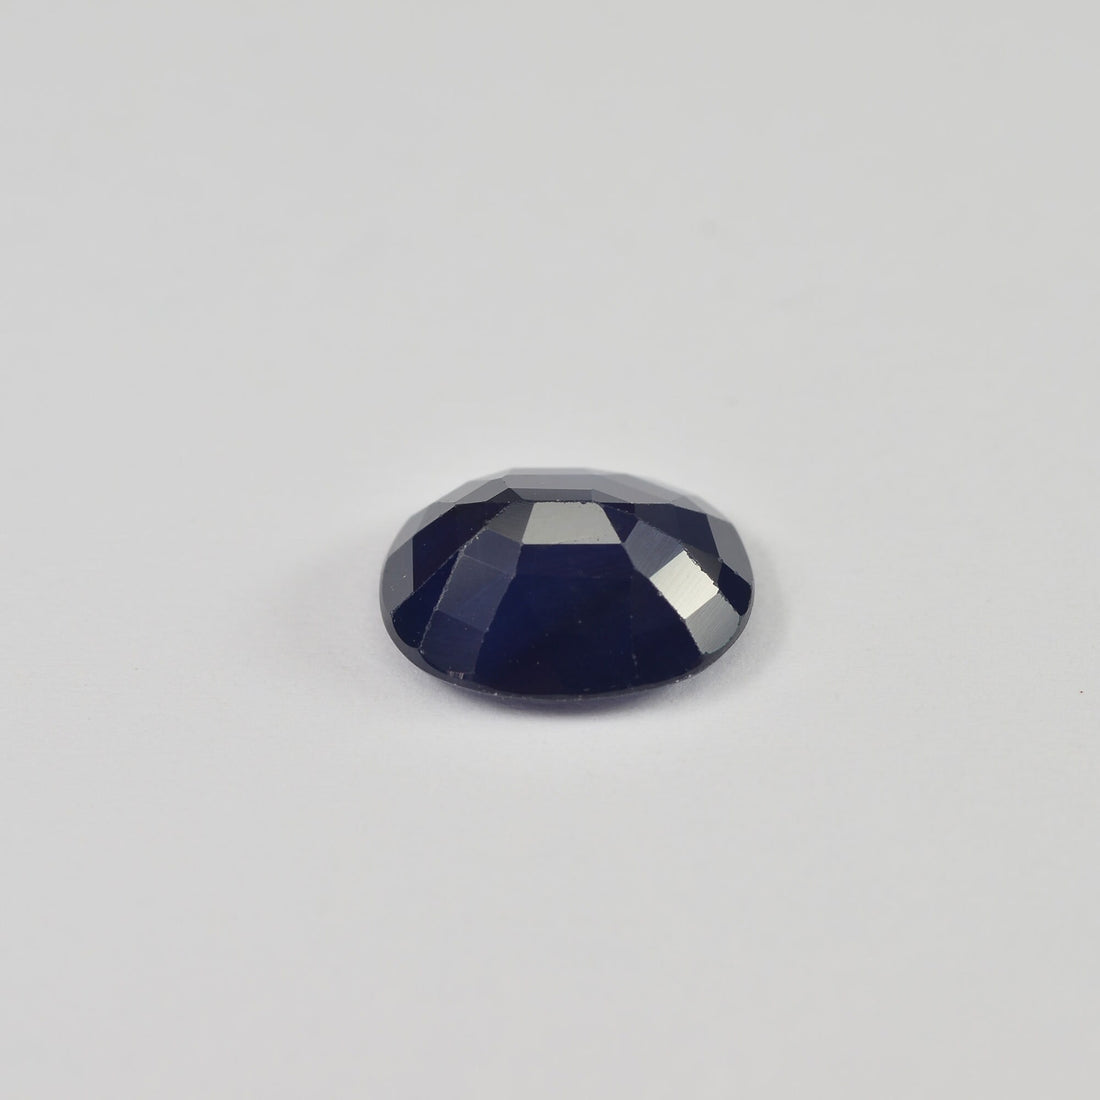 3.02 cts Natural Blue Sapphire Loose Gemstone Oval Cut